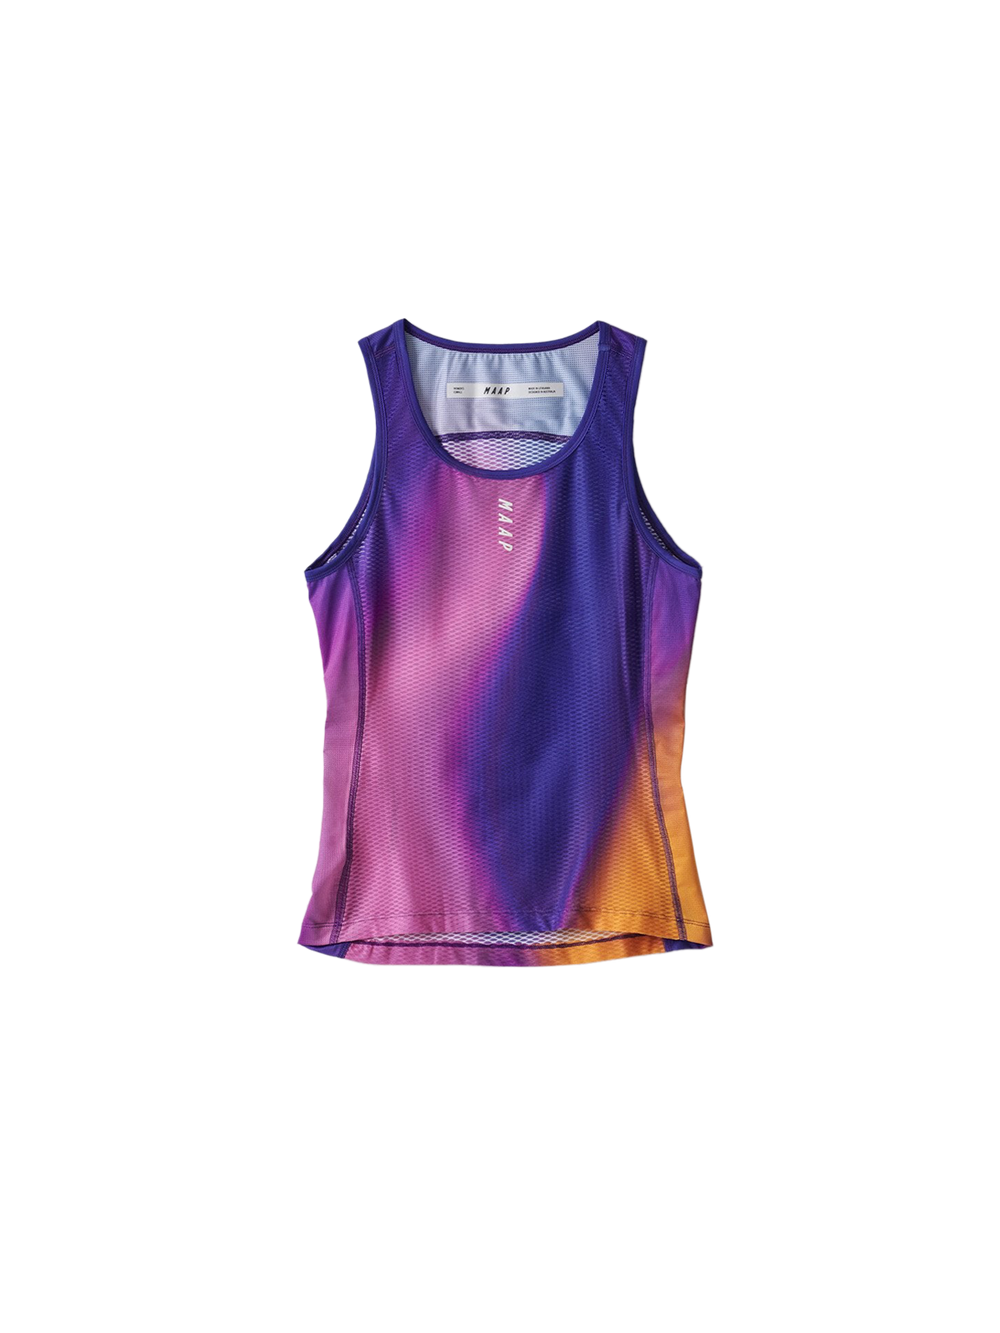 Product Image for Women's Flow Team Base Layer